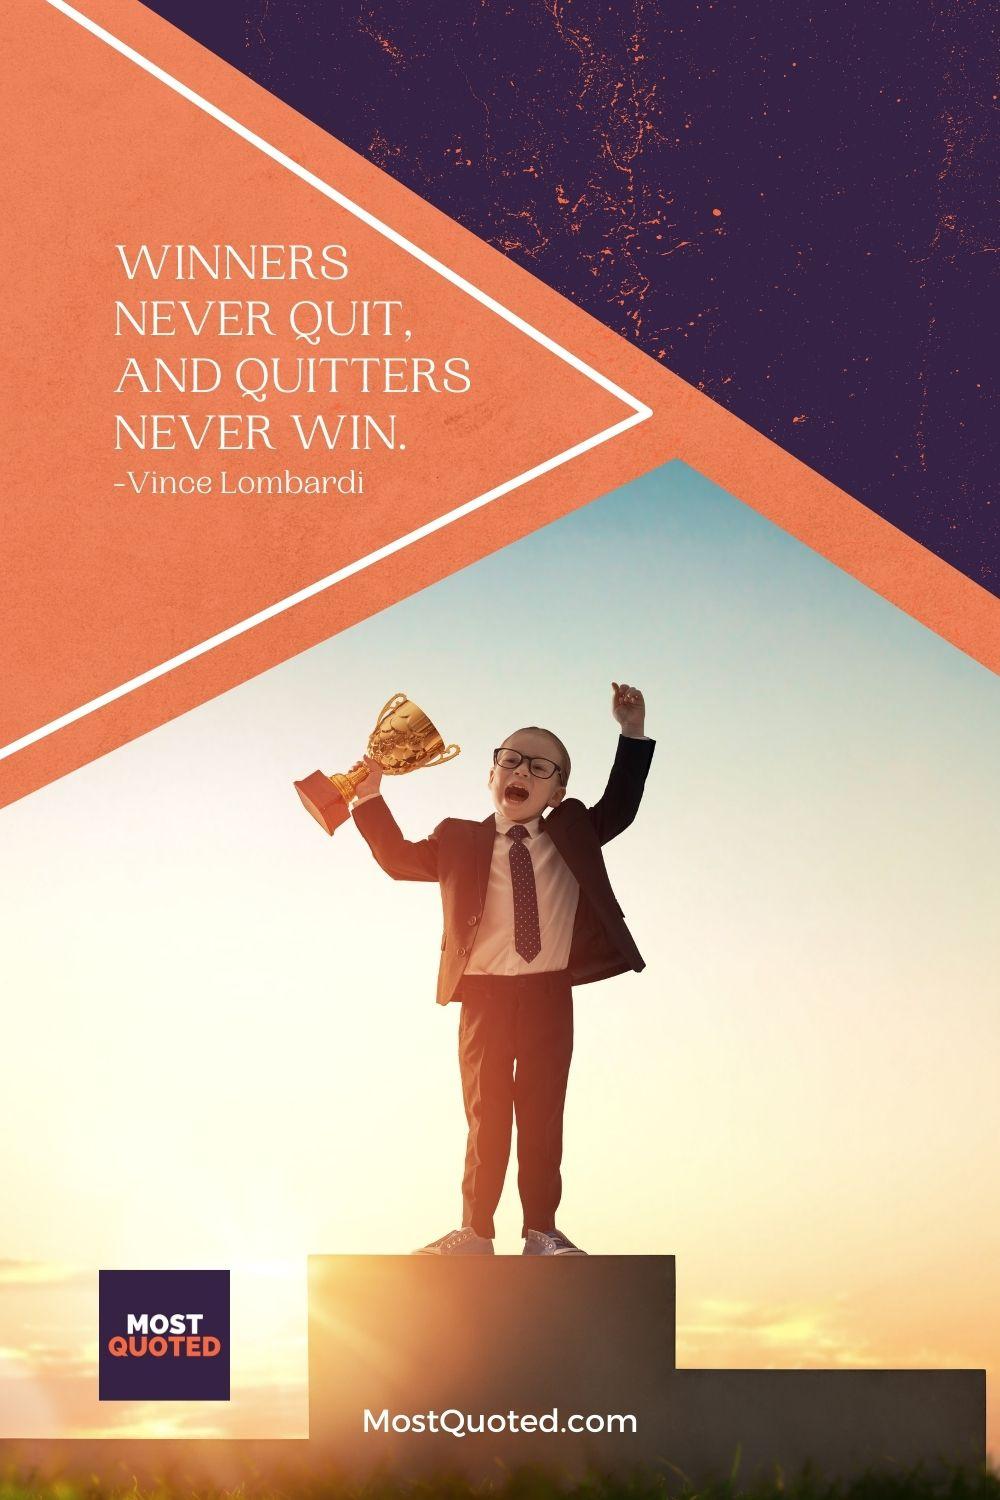 Winners never quit, and quitters never win. - Vince Lombardi